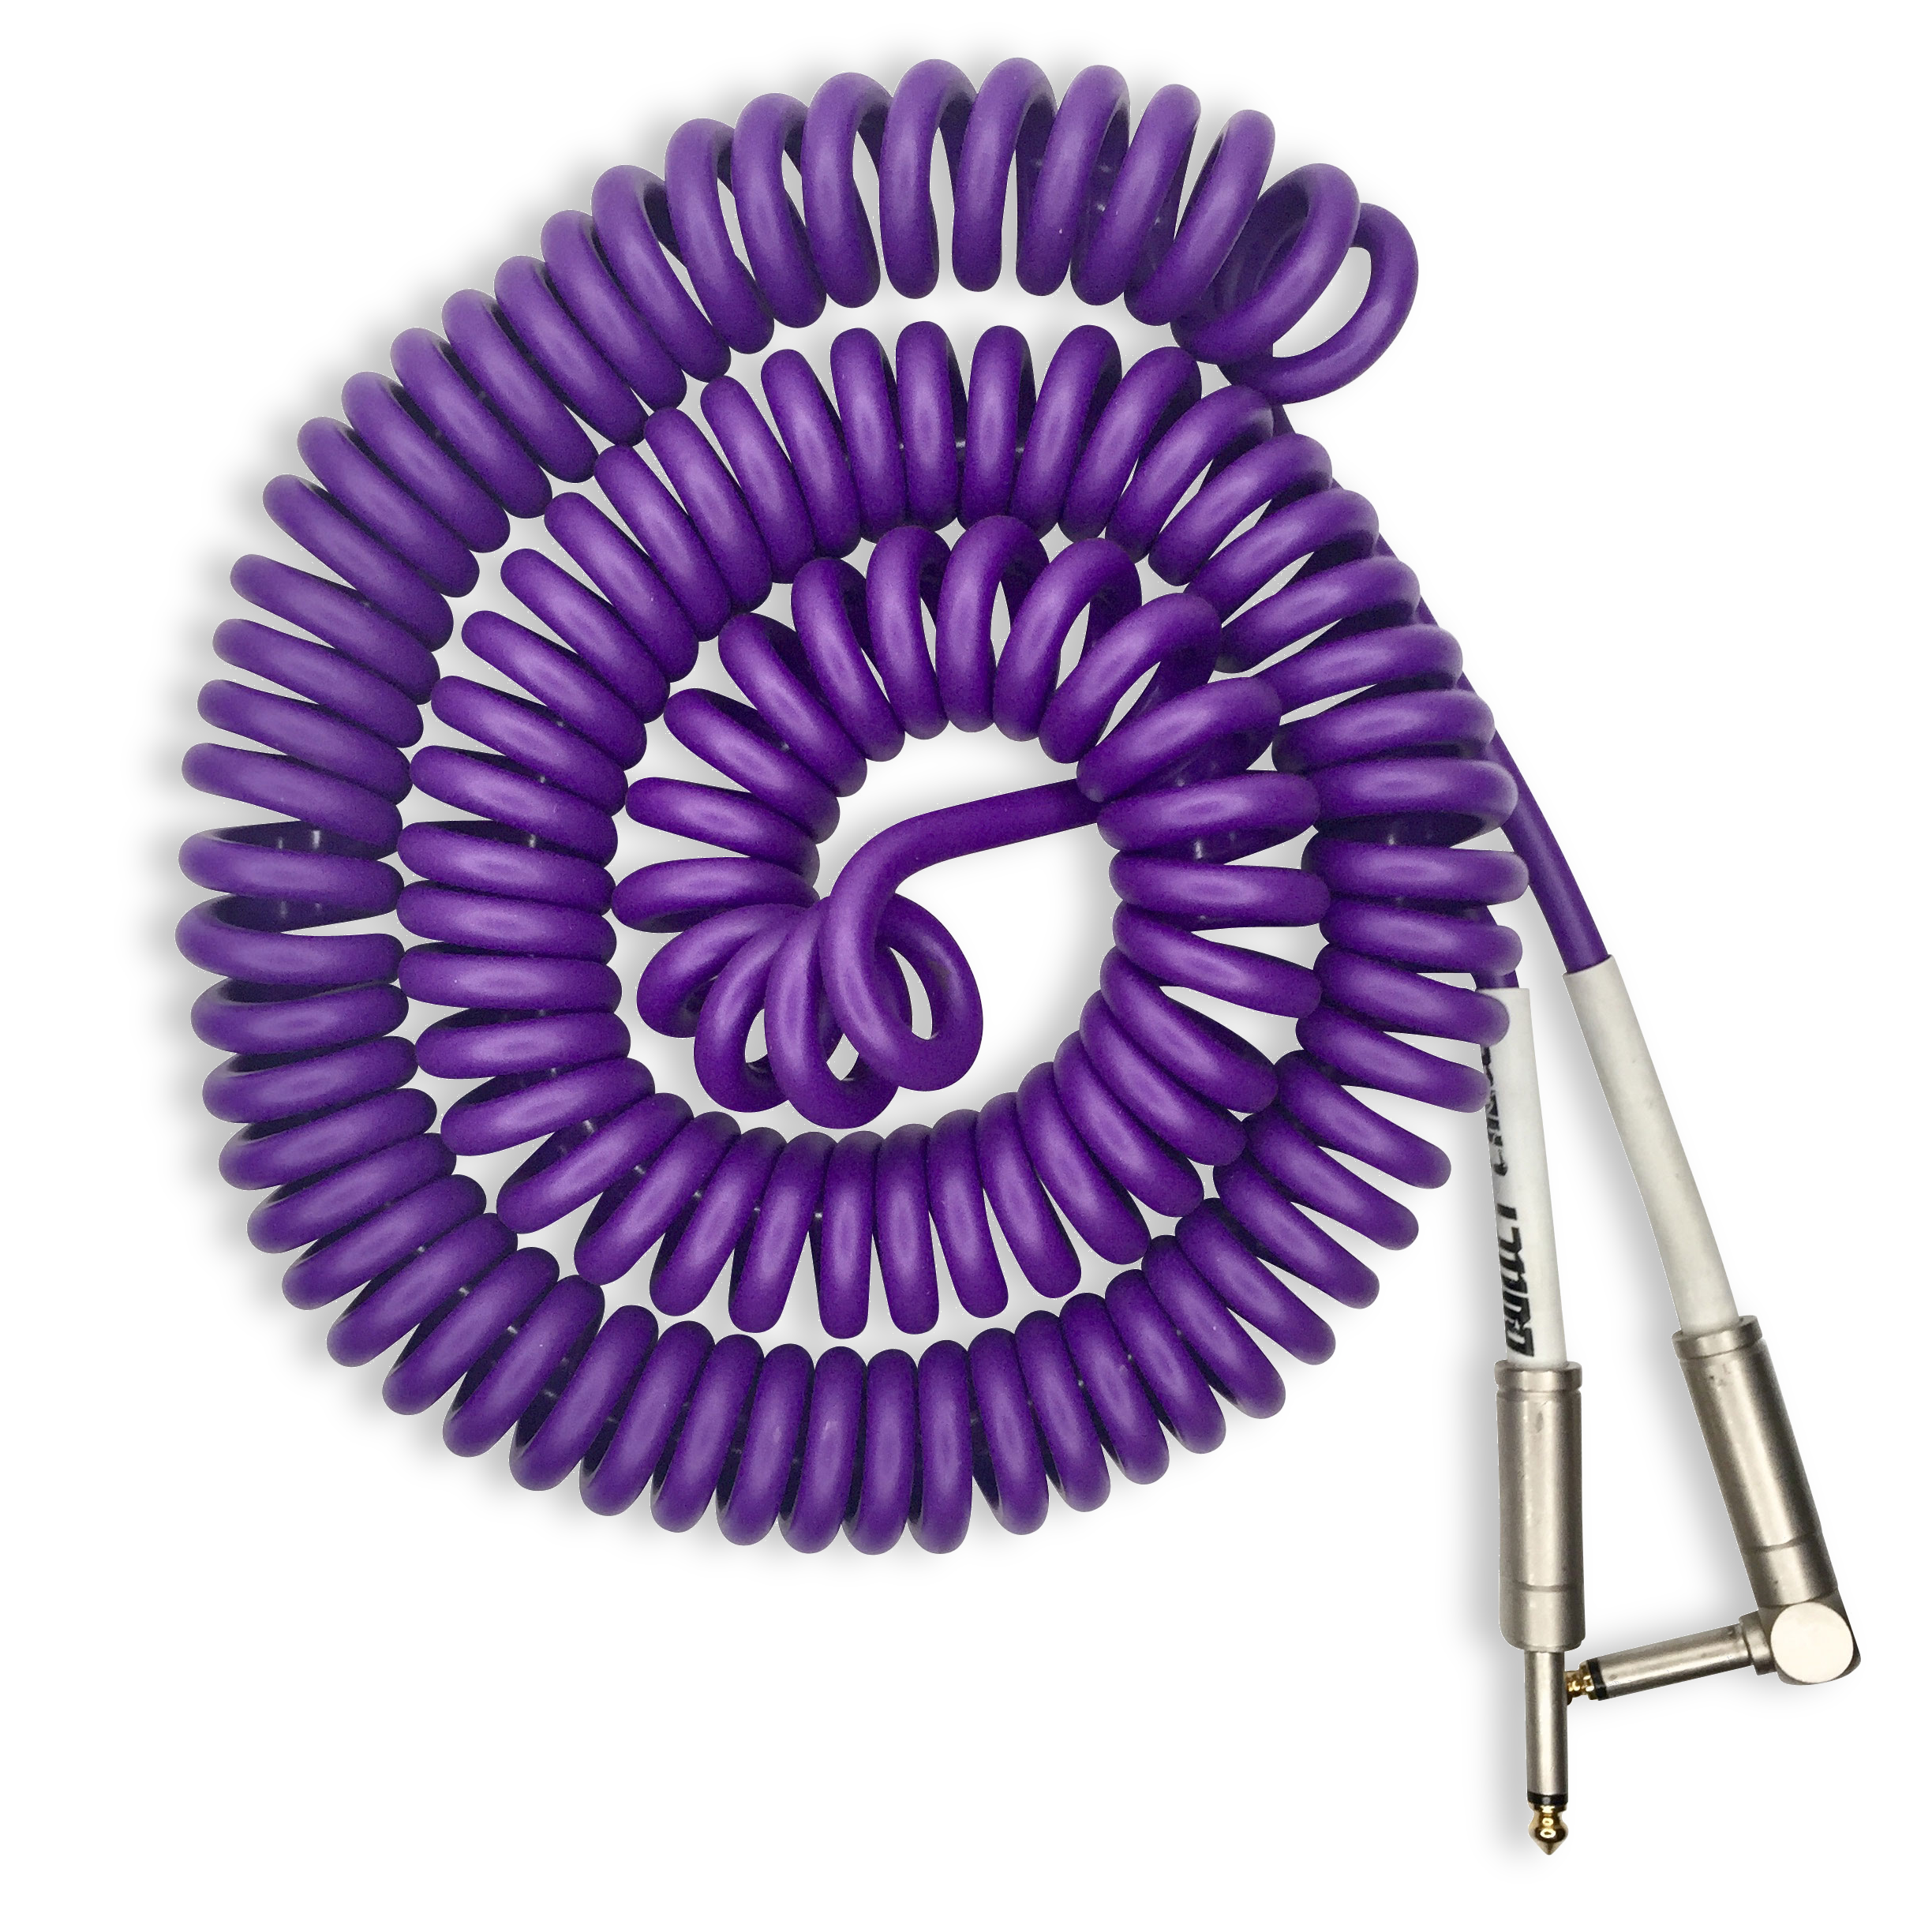 BULLET CABLE 30' PURPLE COIL CABLE - Bullet Cable